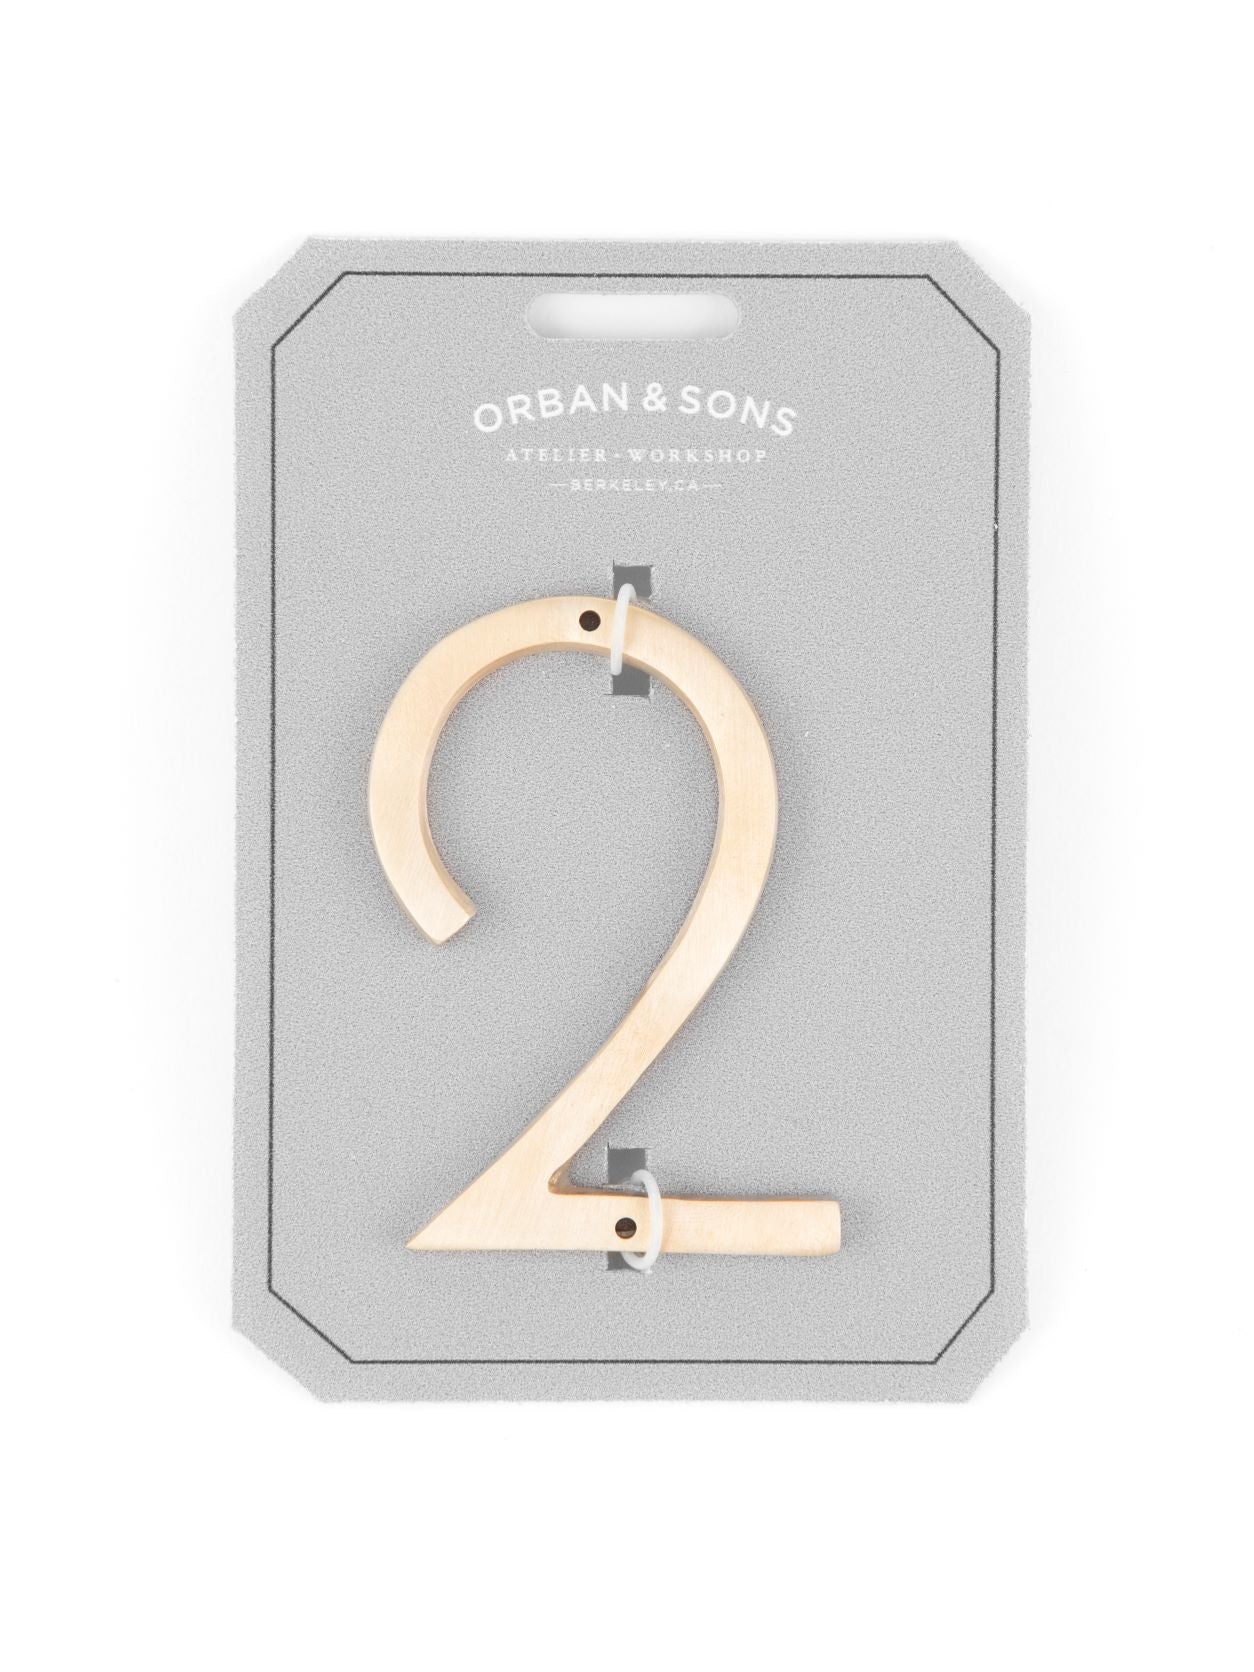 Orban & Sons Brass Numbers 2 House Numbers & Letters Orban & Sons Brand_Orban & Sons CLEAN OUT SALE Corkscrews & Tools Home_Decor KTFWHS Orban & Sons Orban_SonsBrassNumber2_2